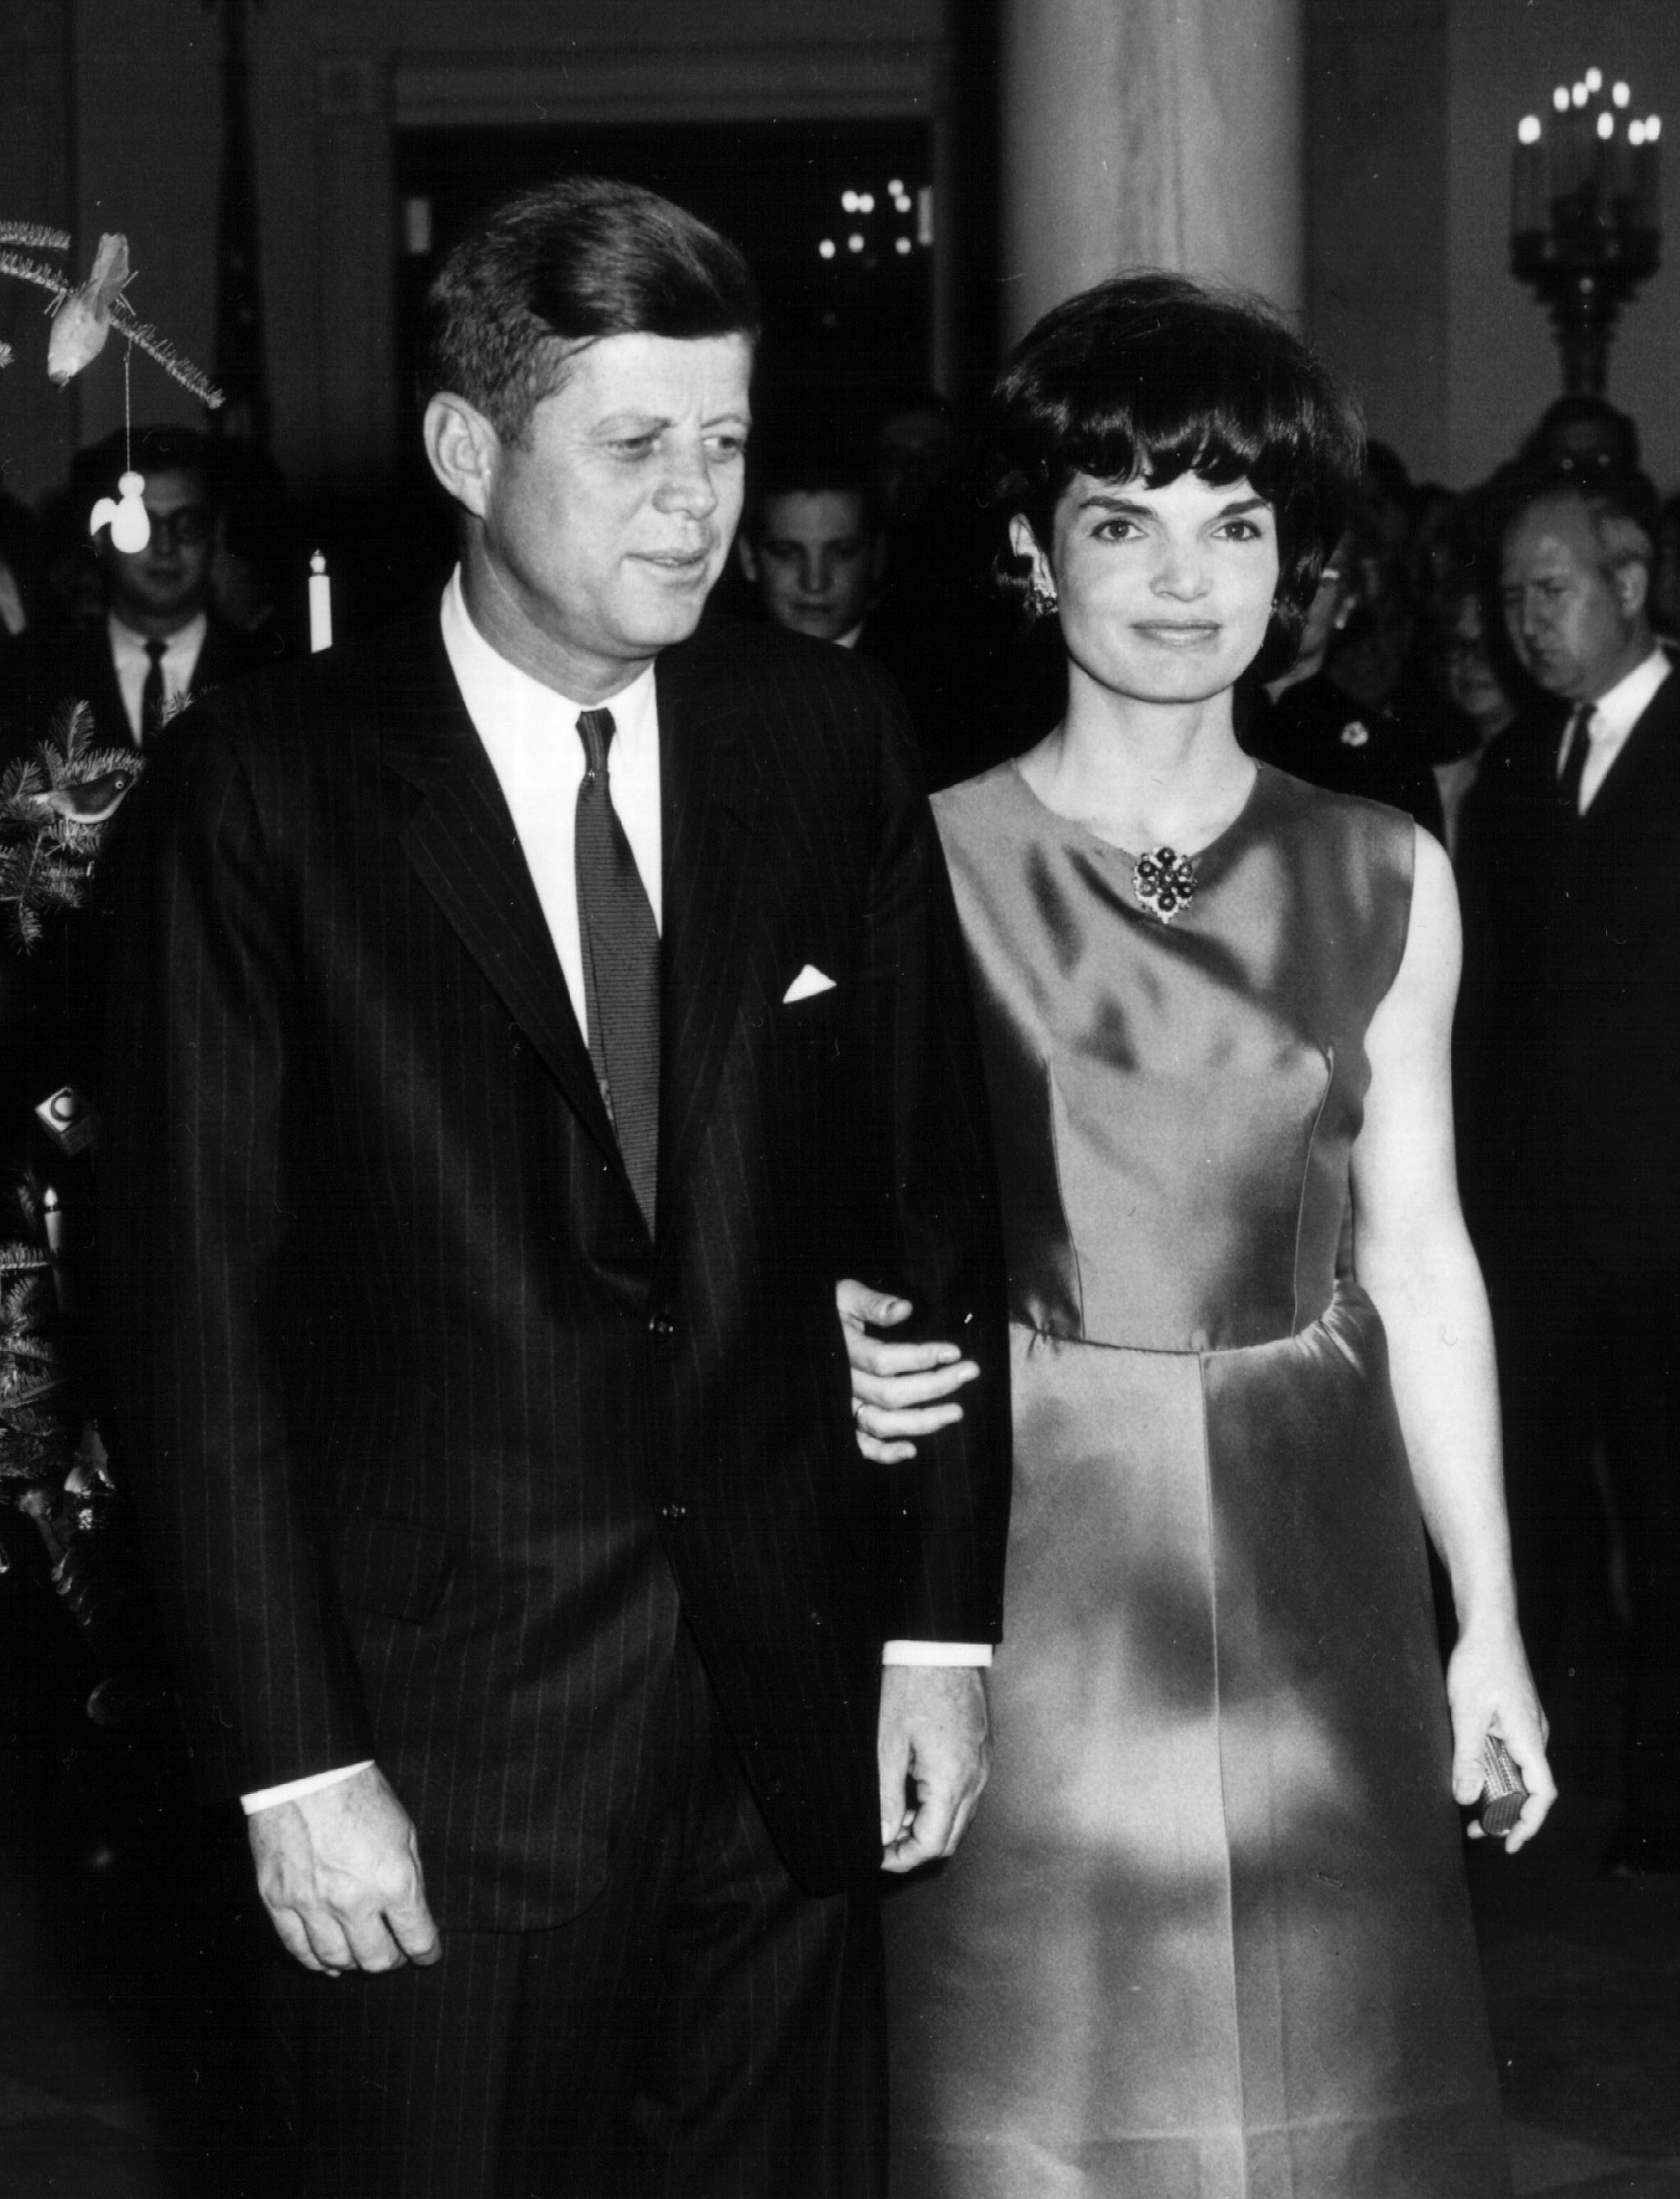 President John F. Kennedy and First Lady Jacqueline Kennedy attend a White House Ceremony in December, 1962, in Washington, DC. | Source: Getty Images.